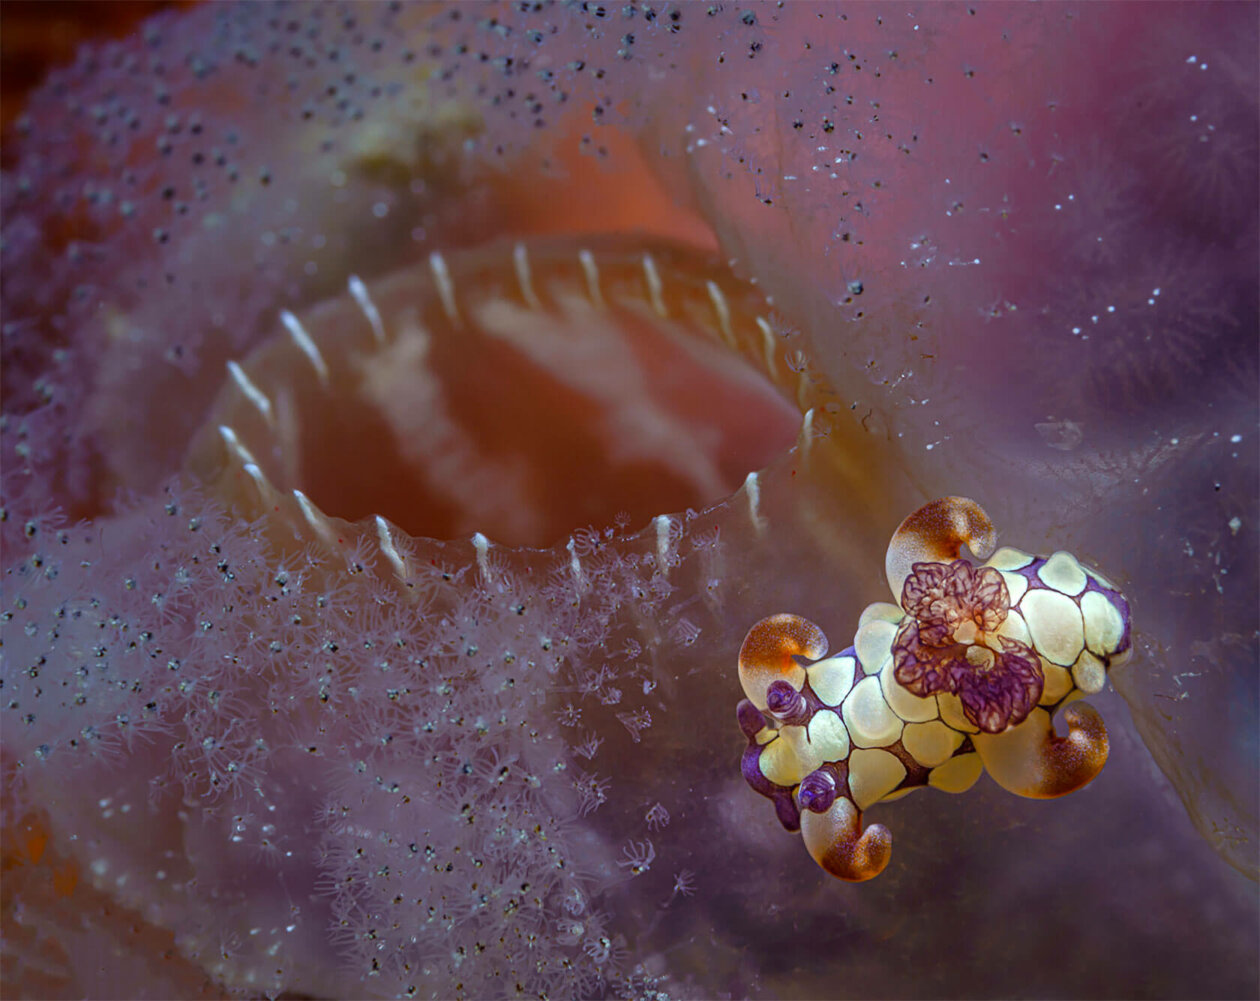 Nudibranchs Gorgeous Pictures Of Sea Slugs By Andrey Savin 18